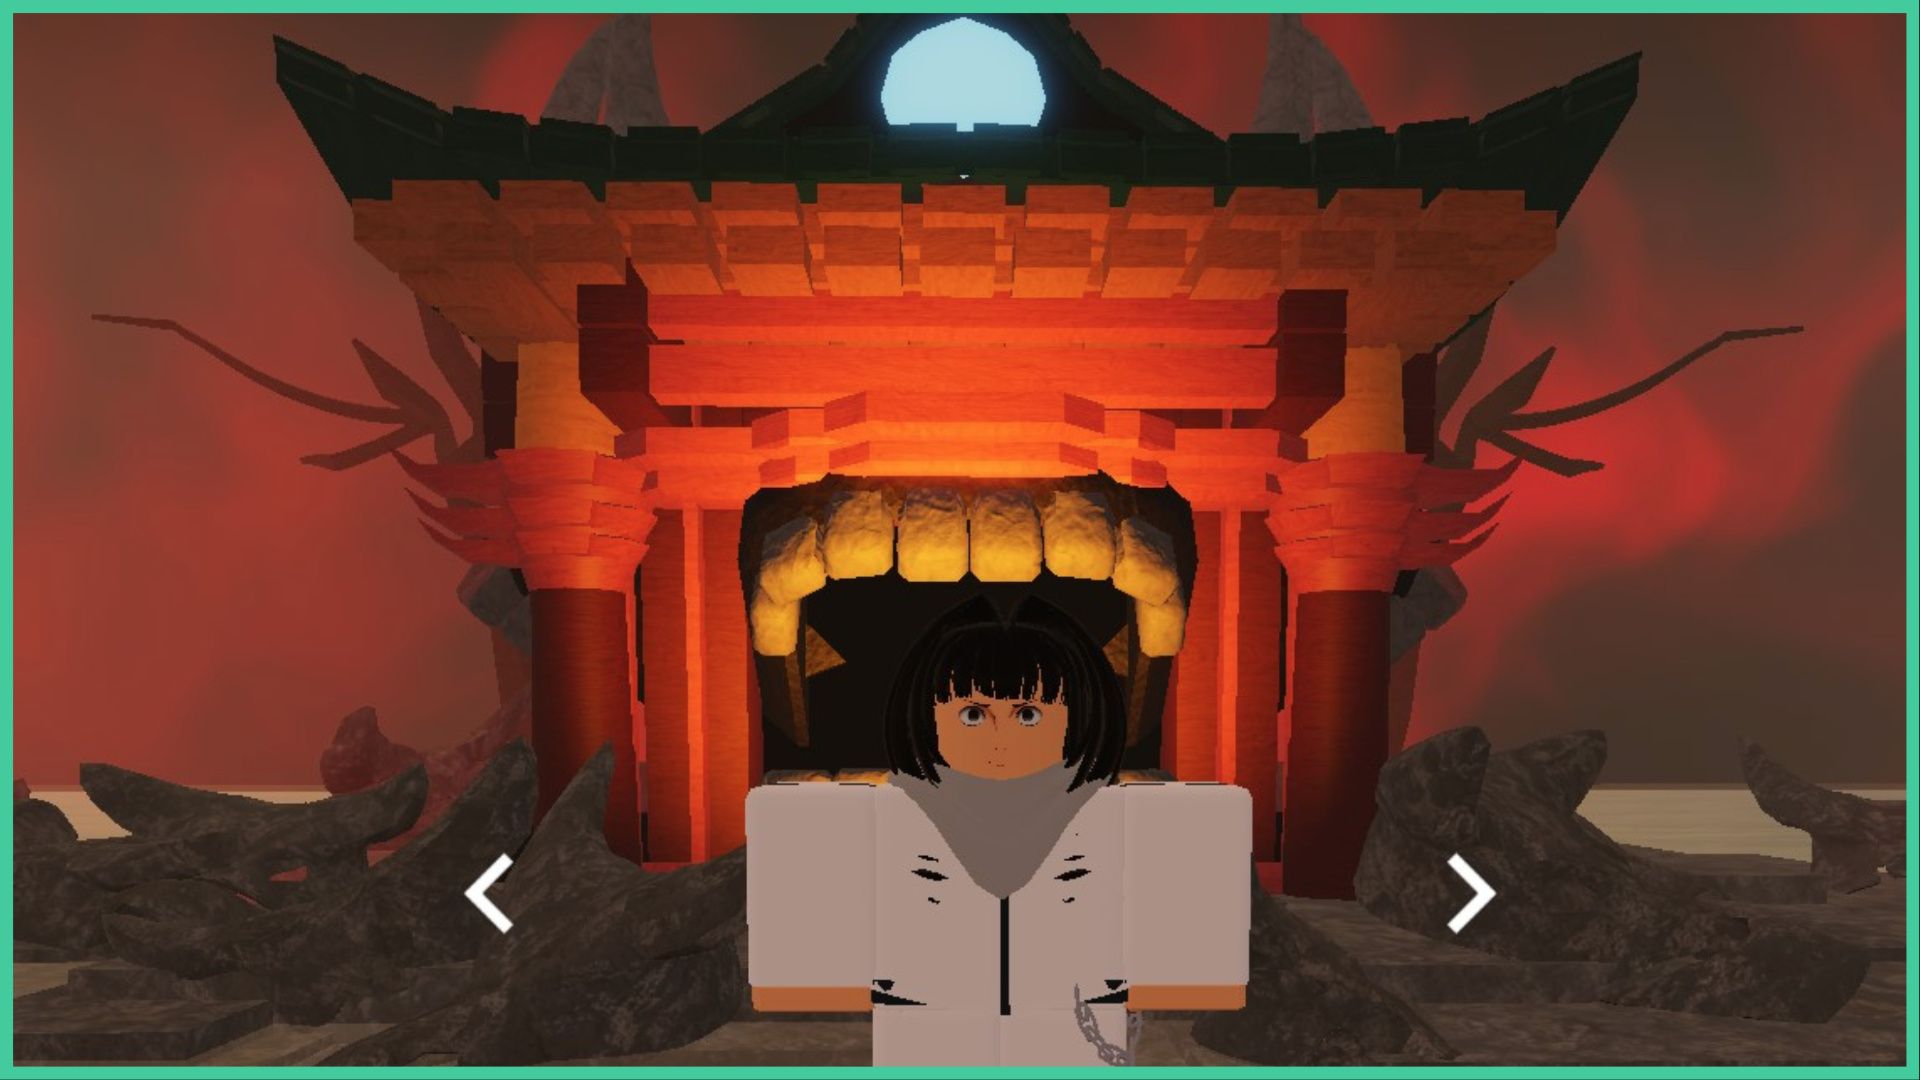 feature image for our kaizen clans guide, the image features a screenshot of the character creation screen from the game, the character is standing in front of a temple entrance that is lined with teeth